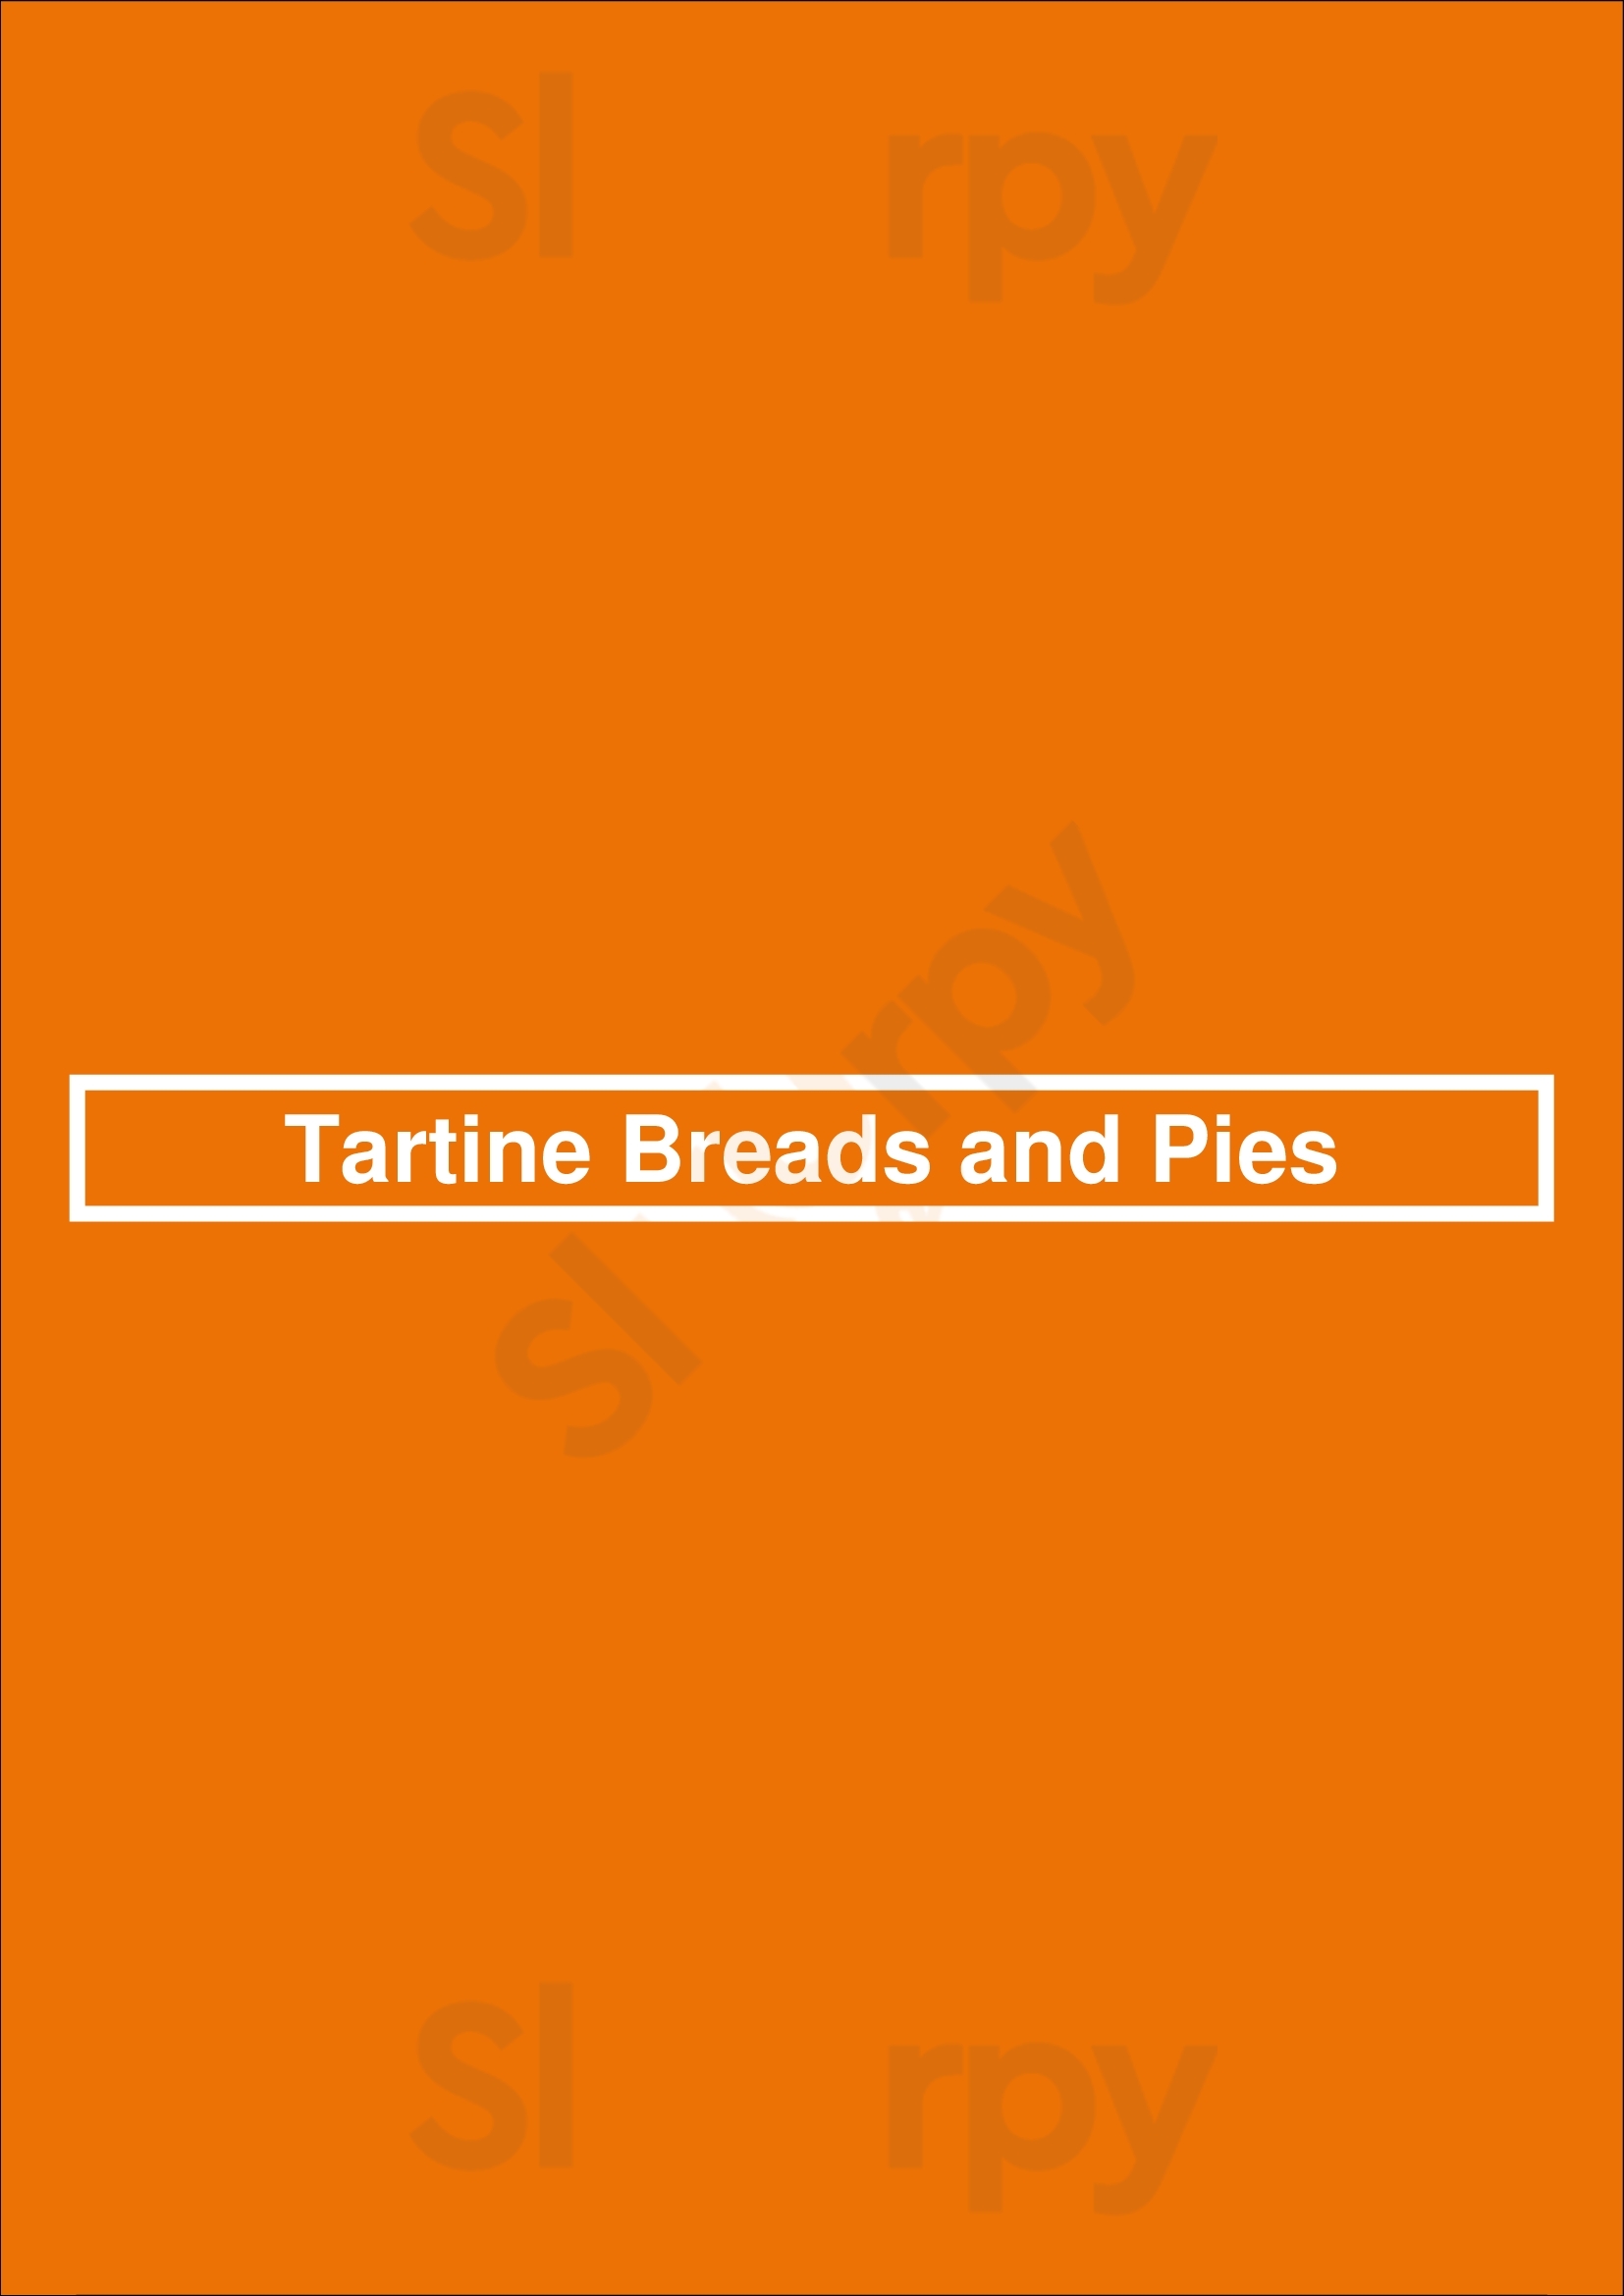 Tartine Breads And Pies Vancouver Menu - 1